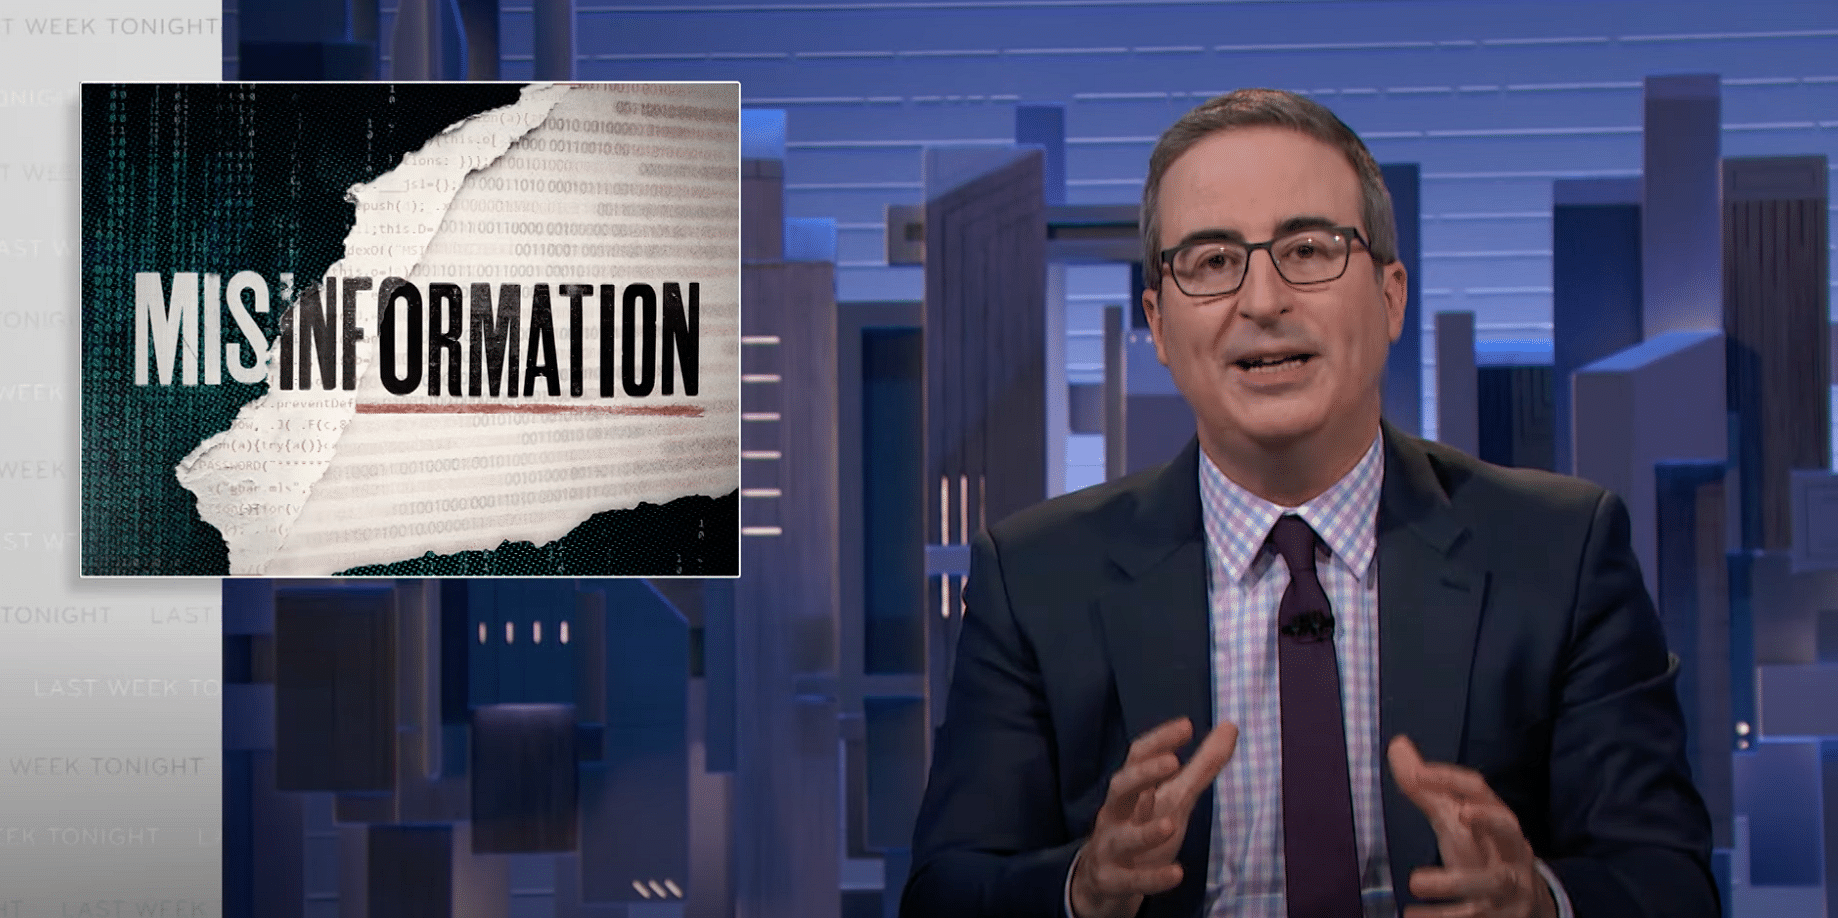 <div class="paragraphs"><p>John Oliver speaks about misinformation in his show 'Last Week Tonight'.</p></div>